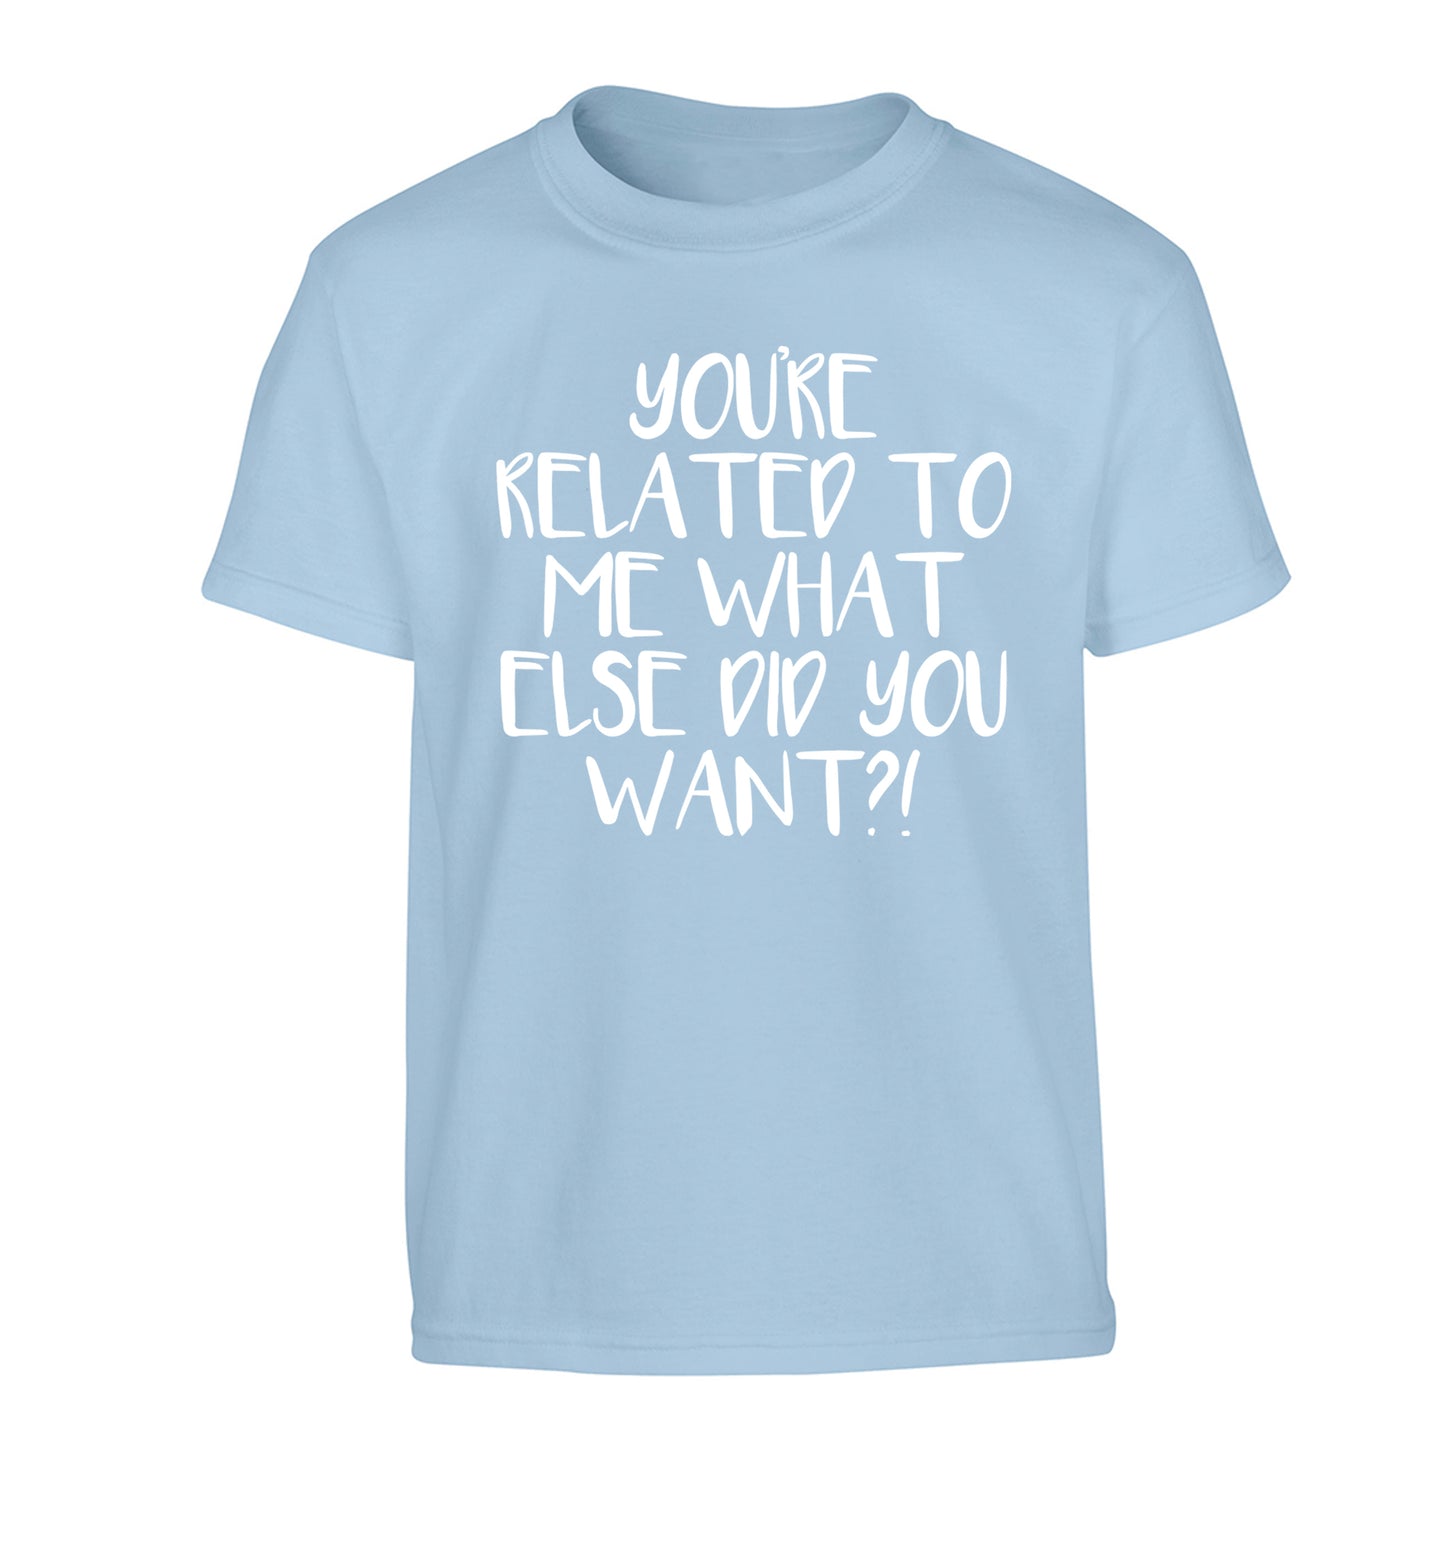 You're related to me what more do you want? Children's light blue Tshirt 12-13 Years